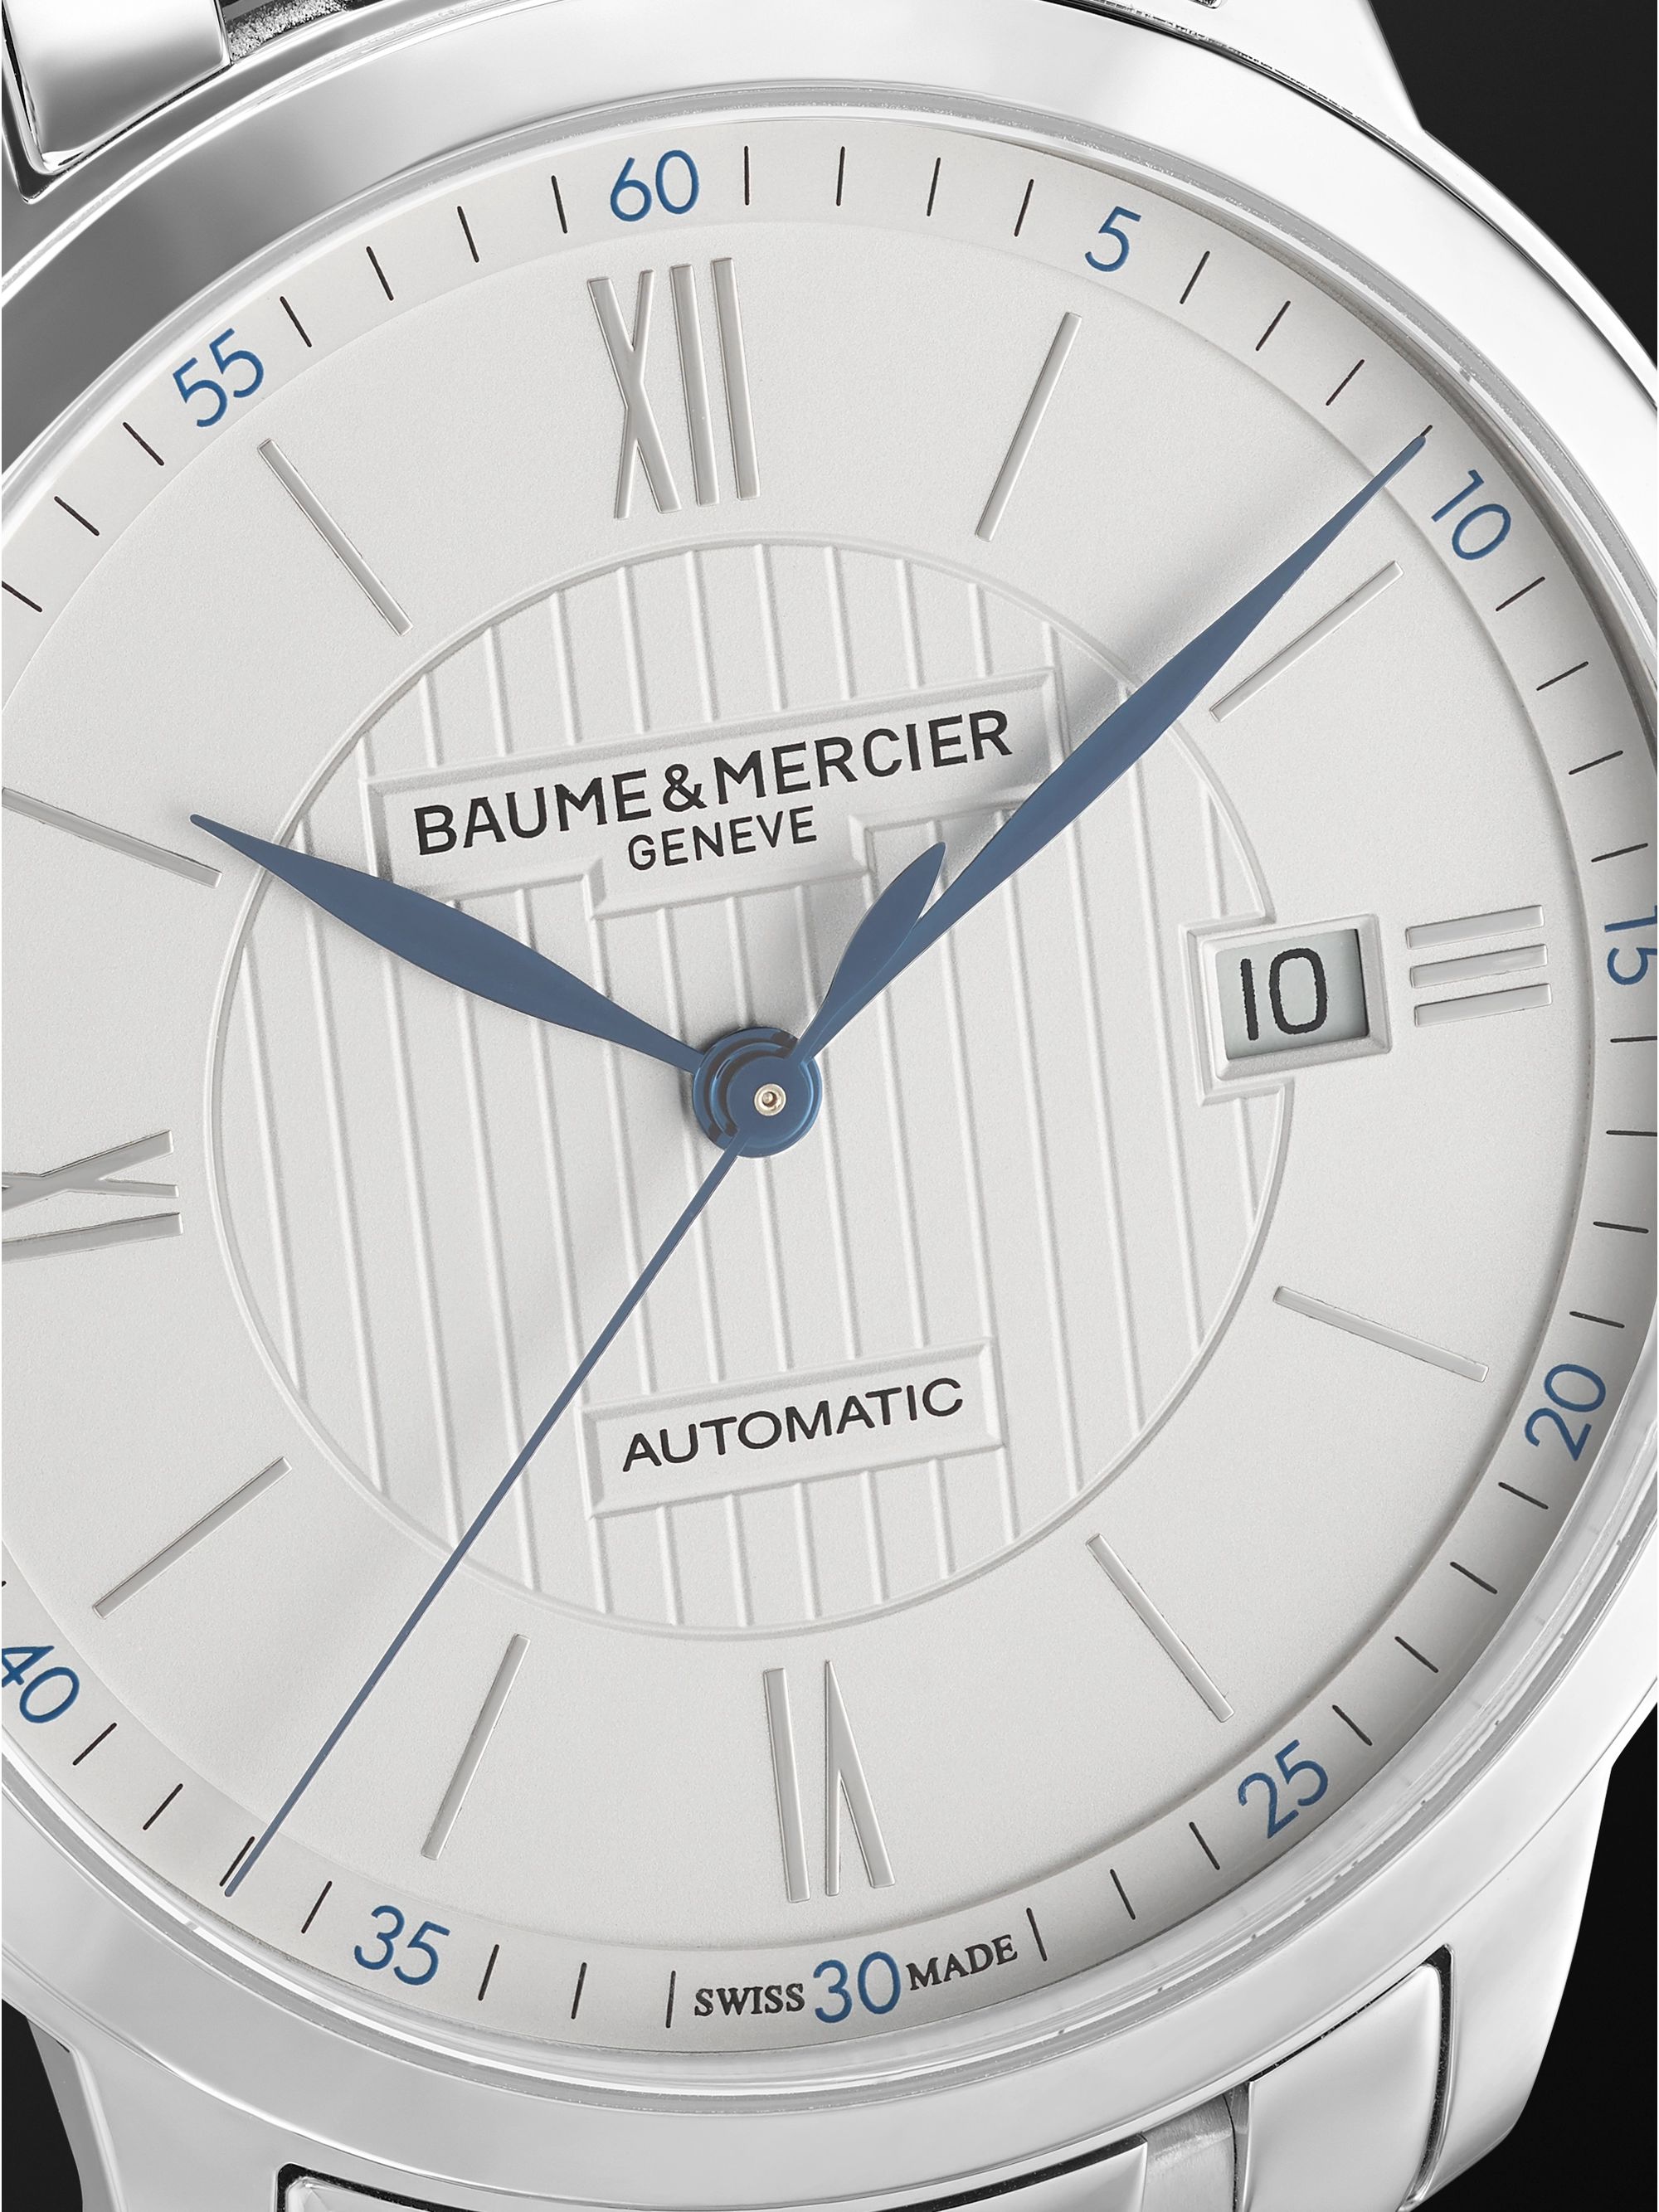 BAUME & MERCIER Classima Automatic 42mm Stainless Steel Watch, Ref. No. 10334